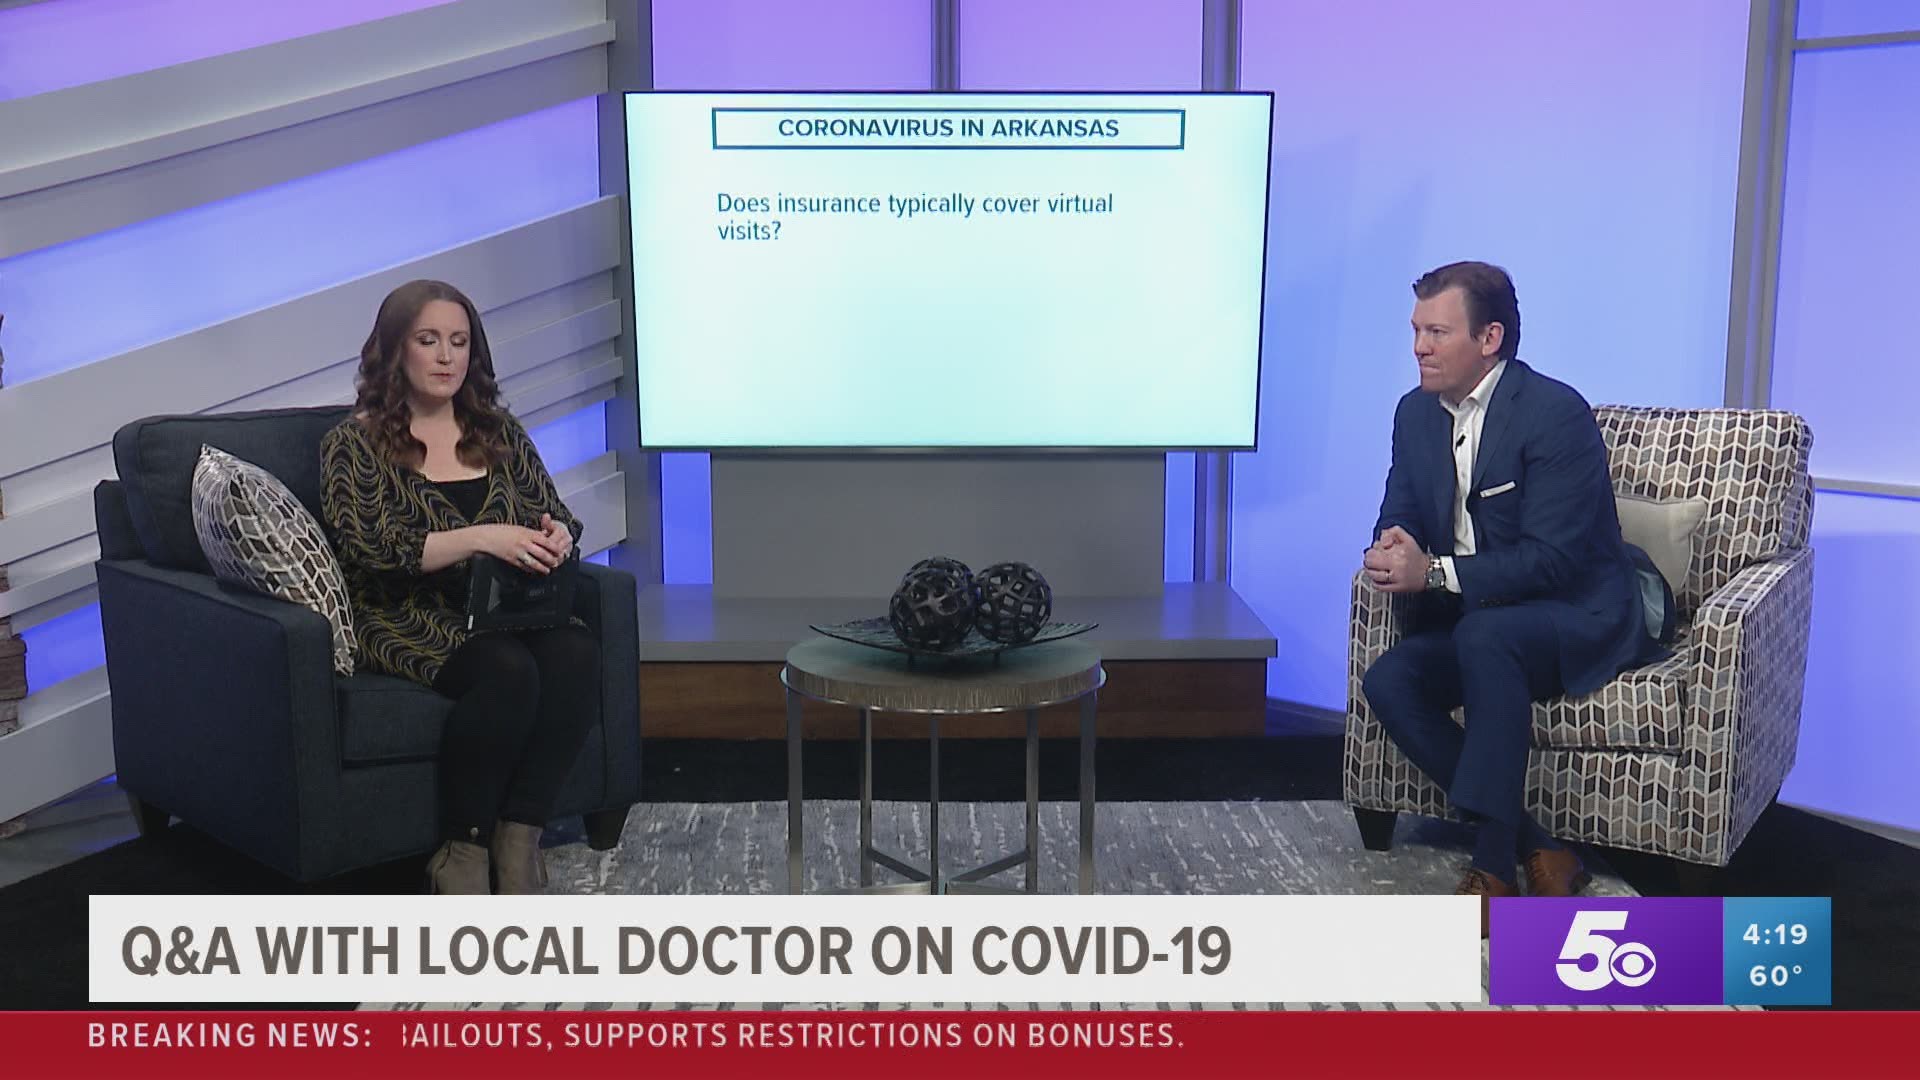 Q&A with local doctor on COVID-19 3-18-20 #2